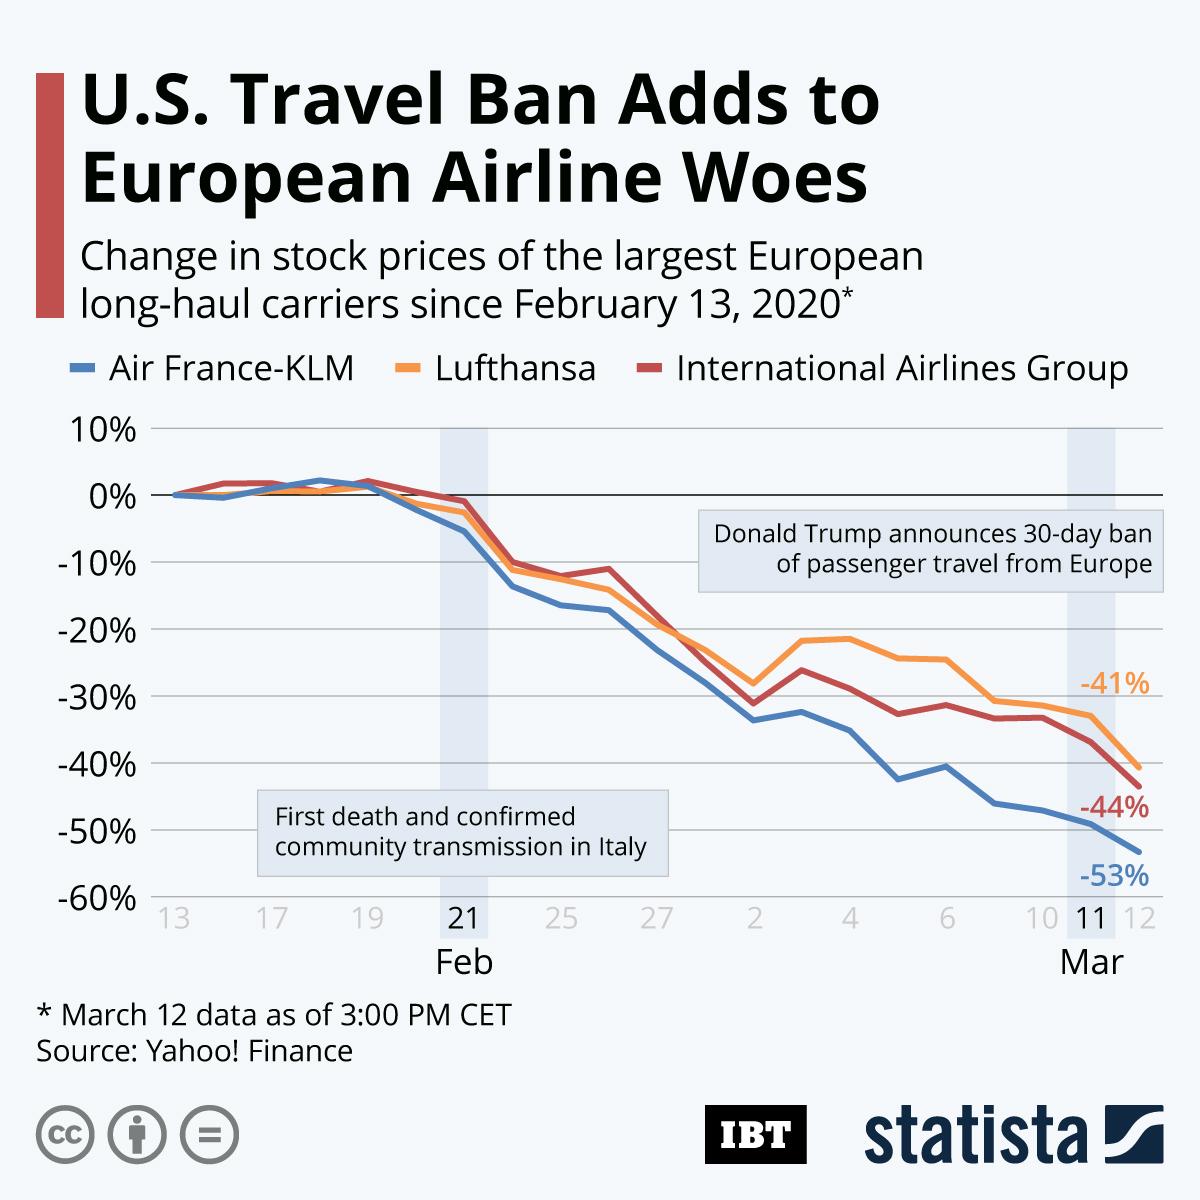 Infographic: US Travel Ban Adds To European Airline Woes